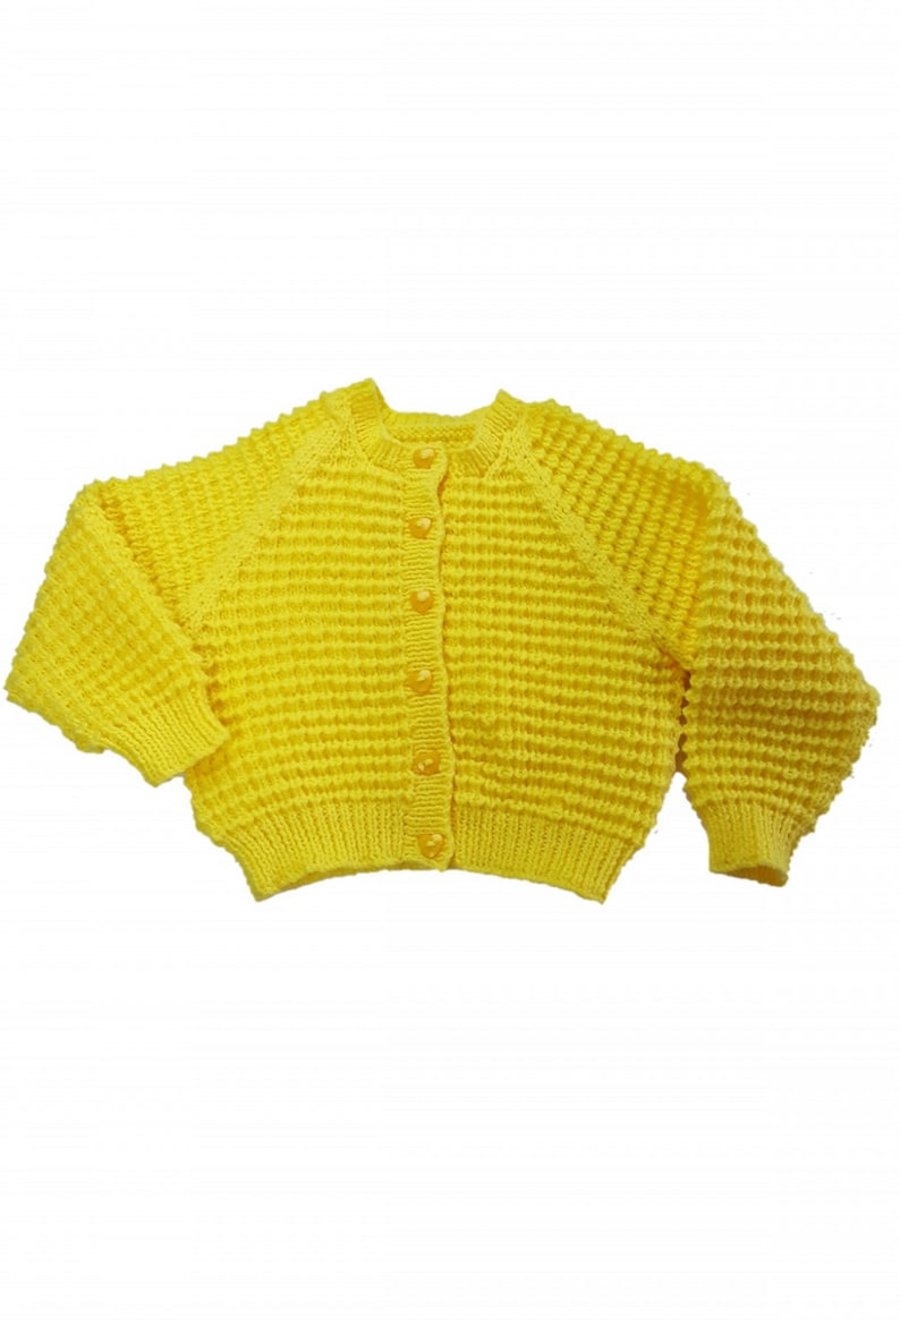 Yellow child's cardigan hand knitted with all over textured pattern 1-2 yrs